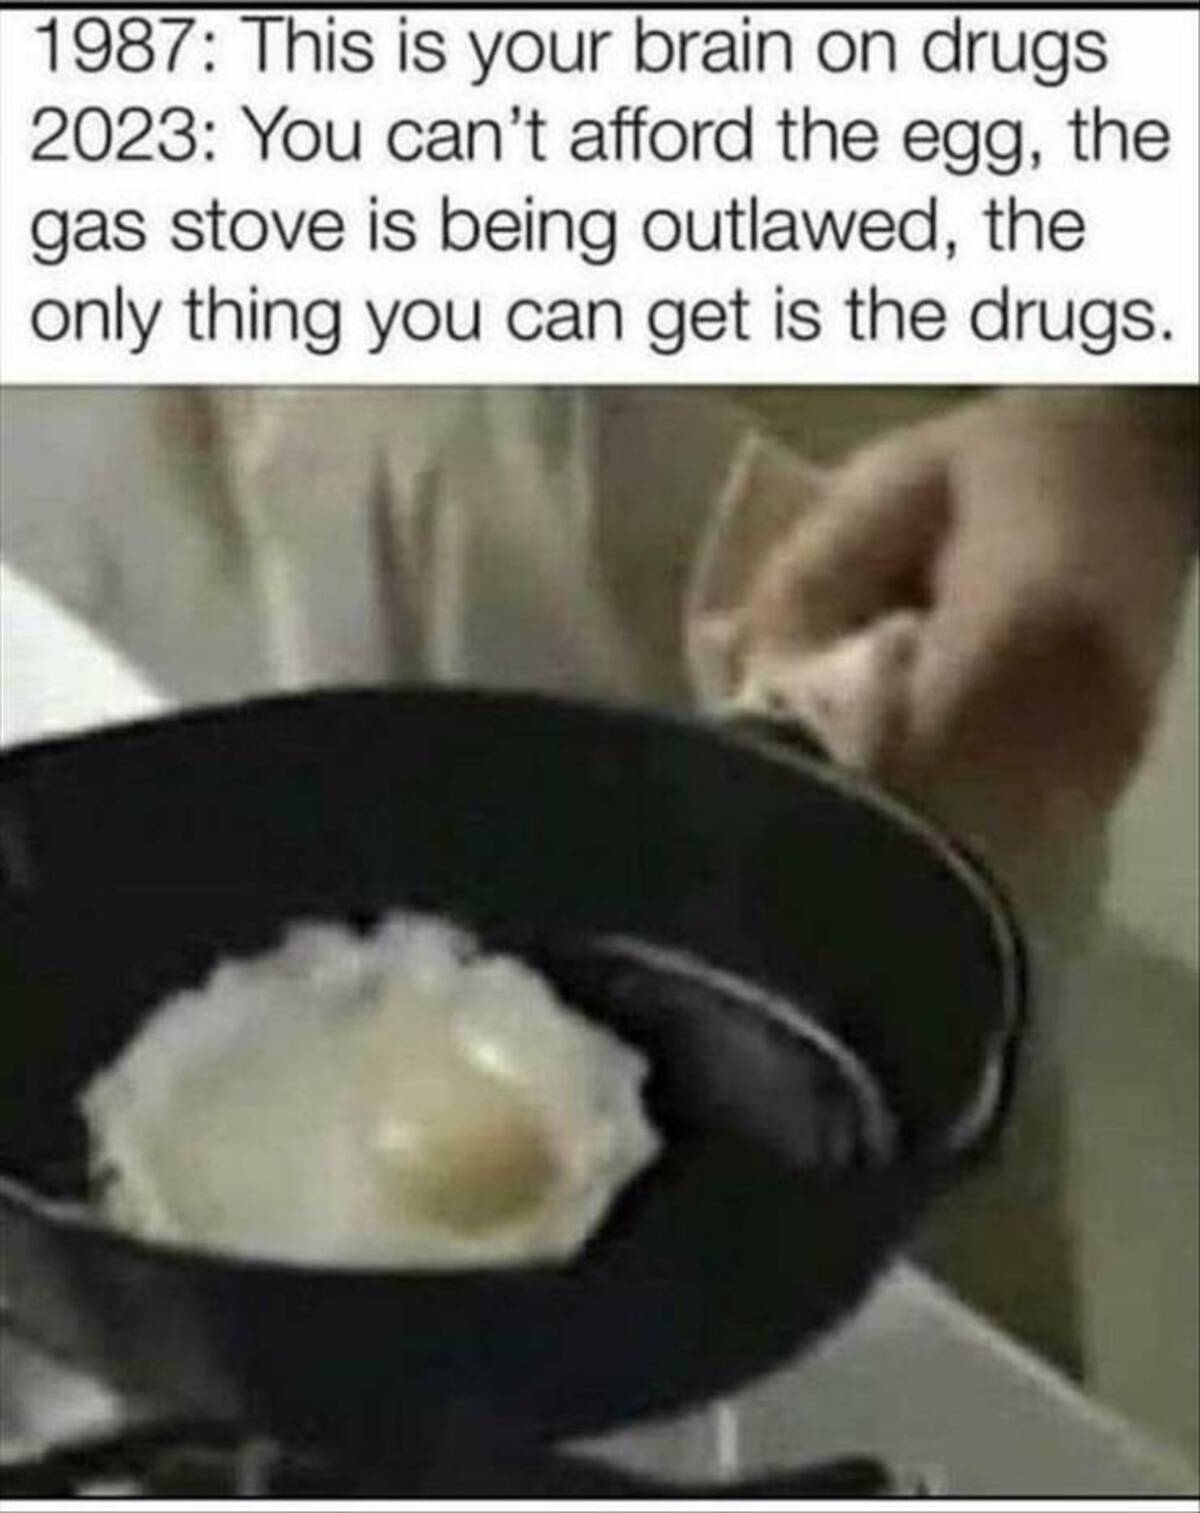 gas stove ban meme - 1987 This is your brain on drugs 2023 You can't afford the egg, the gas stove is being outlawed, the only thing you can get is the drugs.